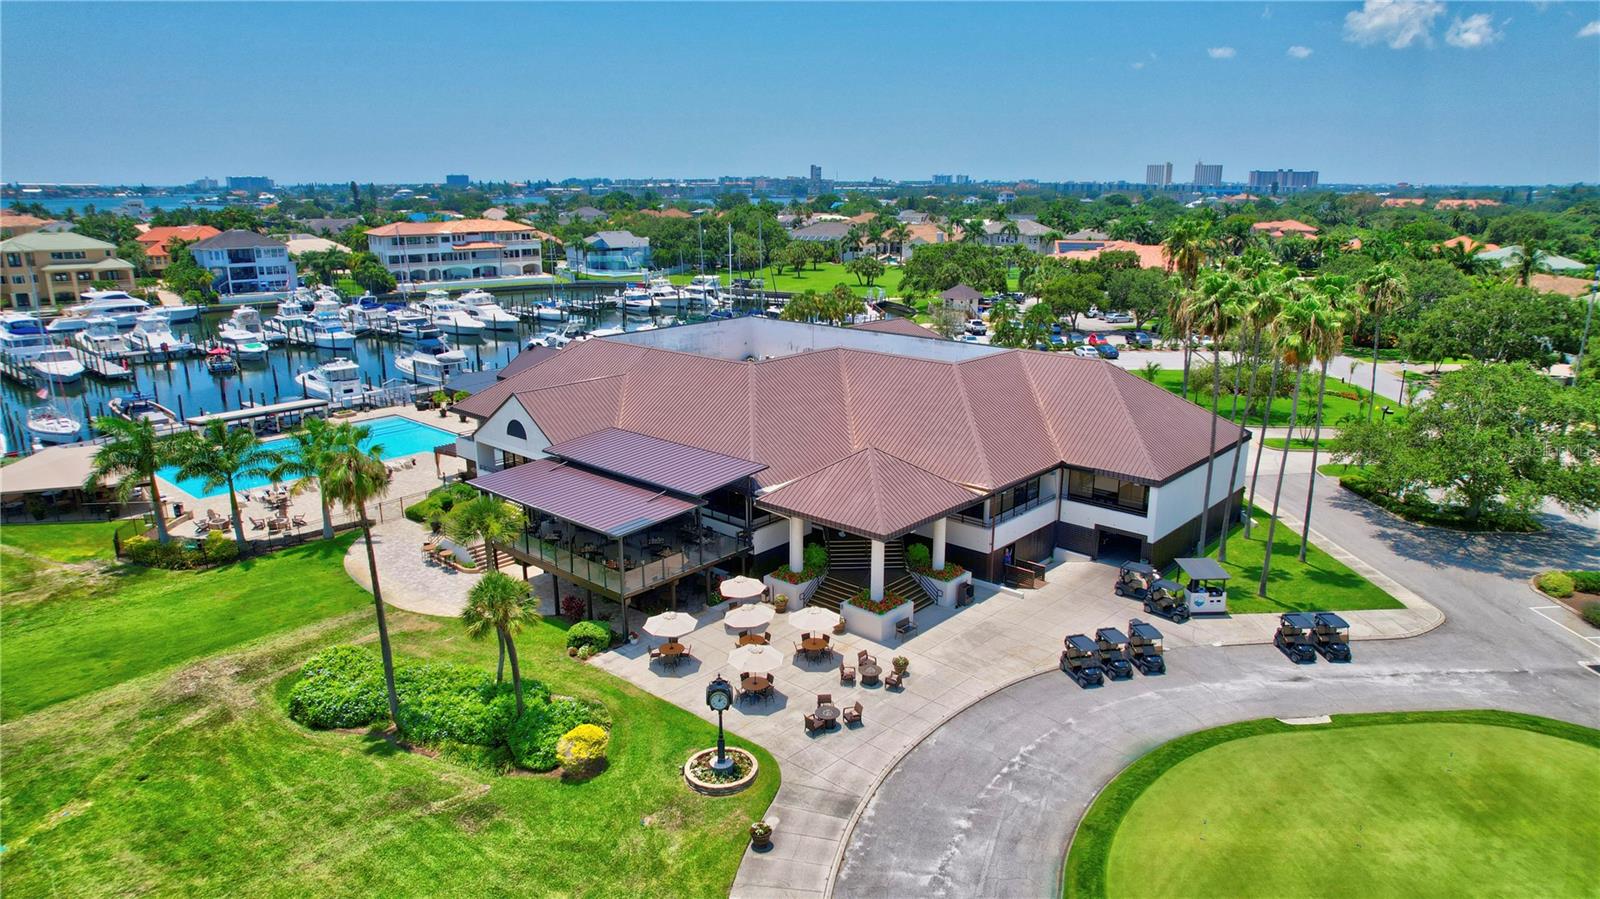 Master Club House, Jr Olympic Pool, Marina and Golf Club carts with storage.